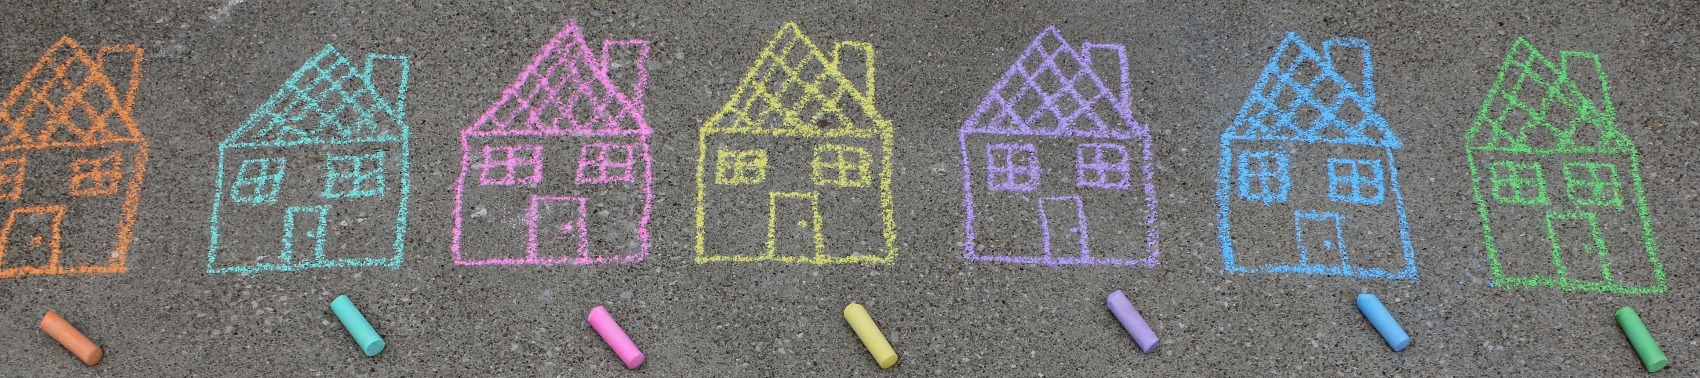 seven houses drawn in orange, teal, pink, yellow, lavender, blue, and green chalk